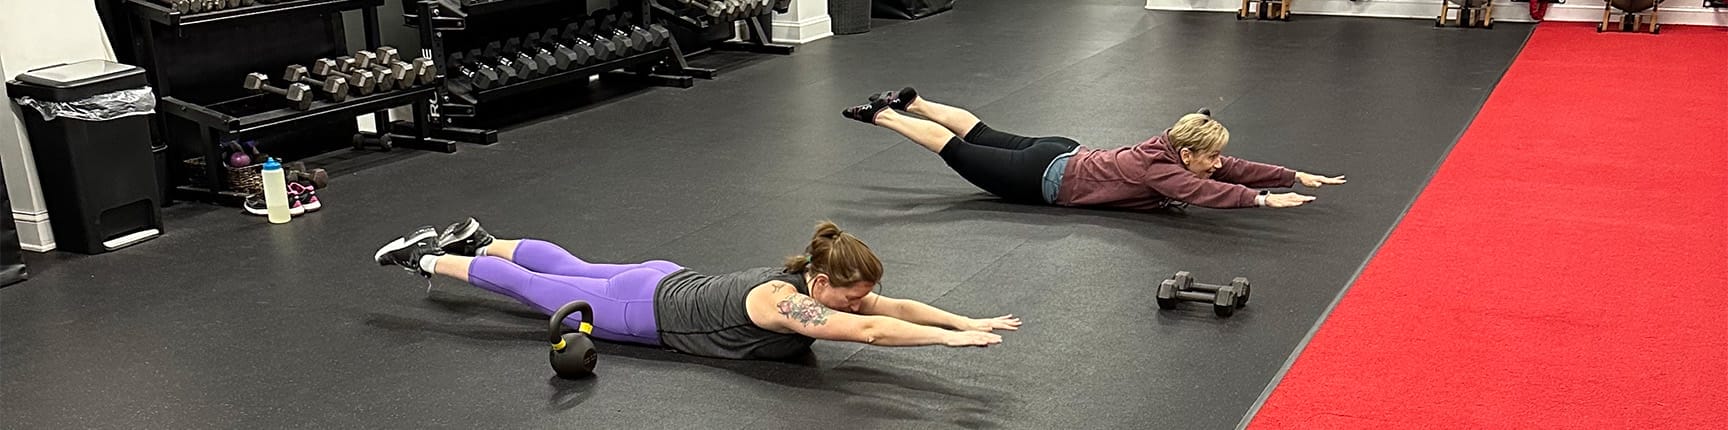 women doing planks and training at your own fitness goals at CoreFit Training Studio